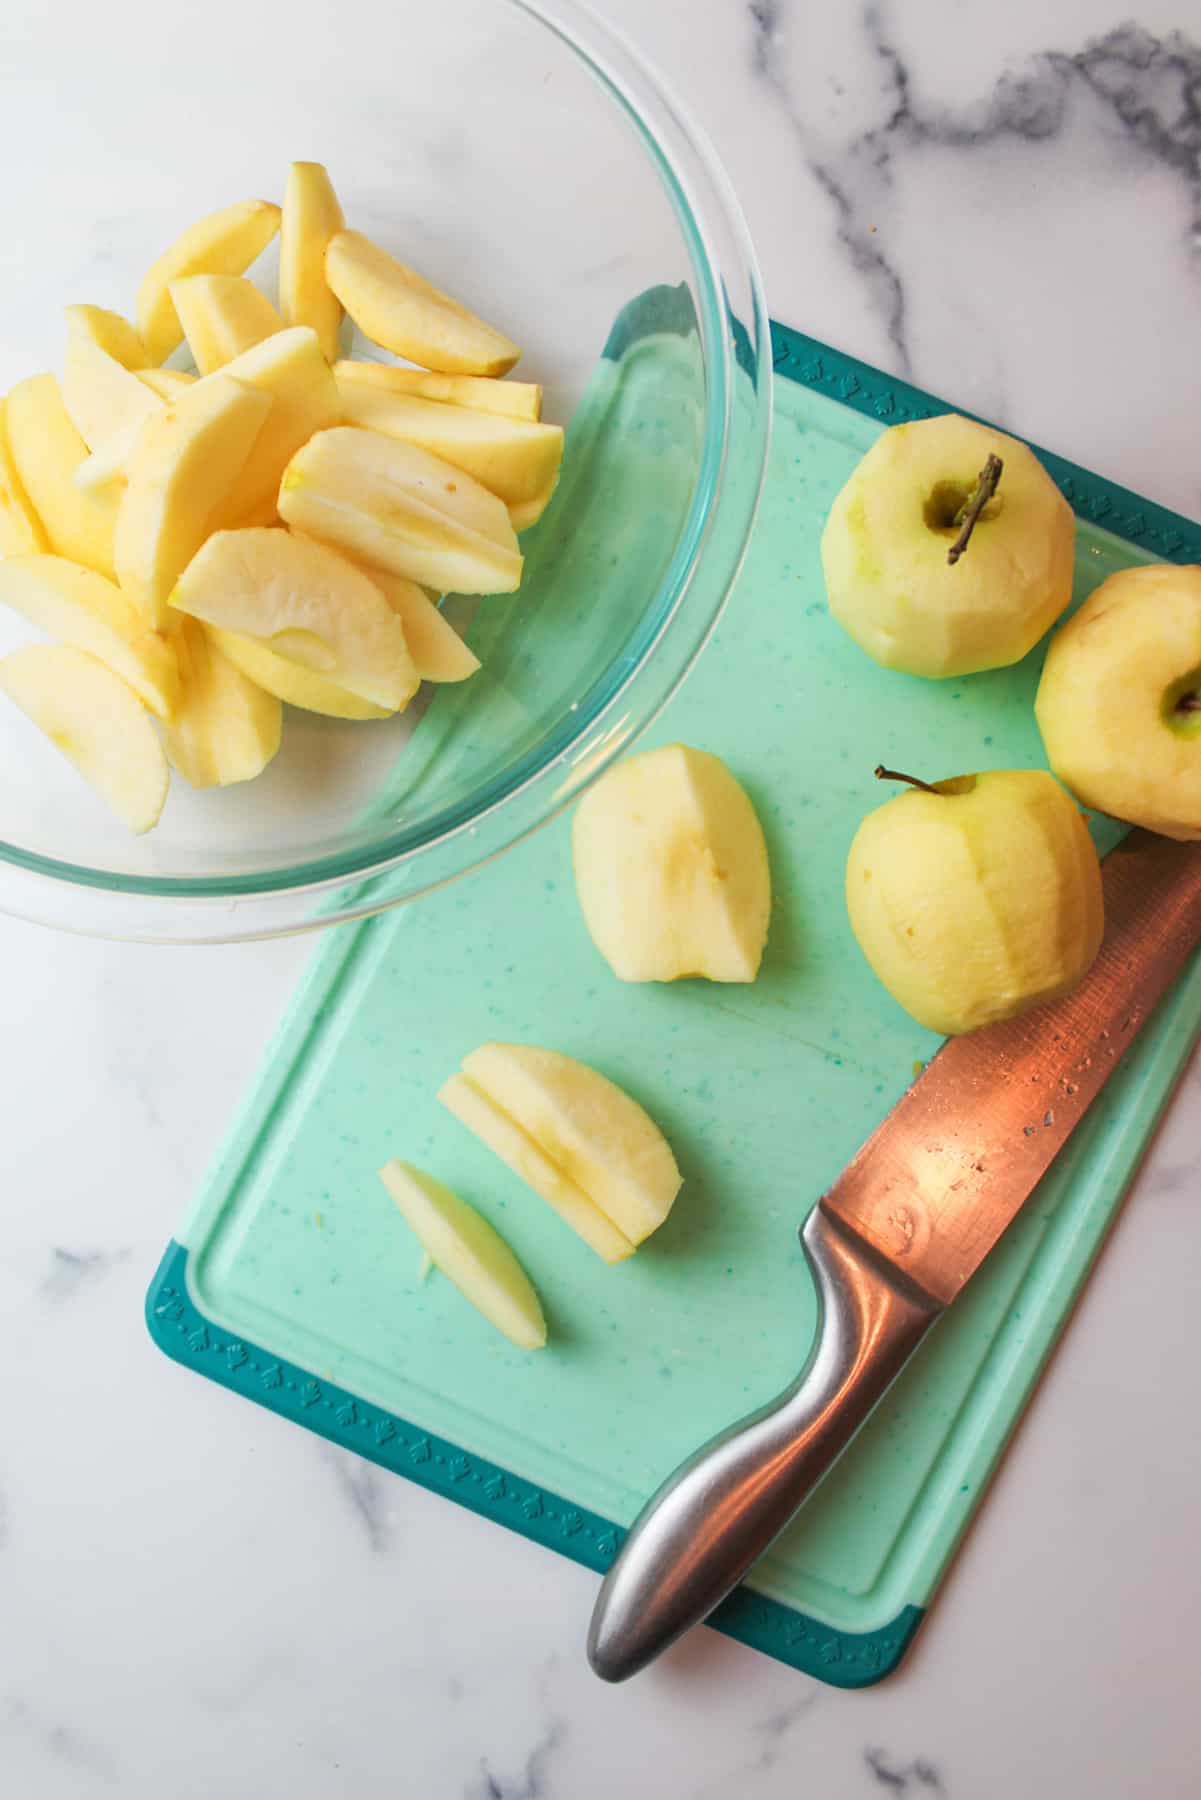 sliced apples on a cutting board with a knife and a bowl of apple slices.